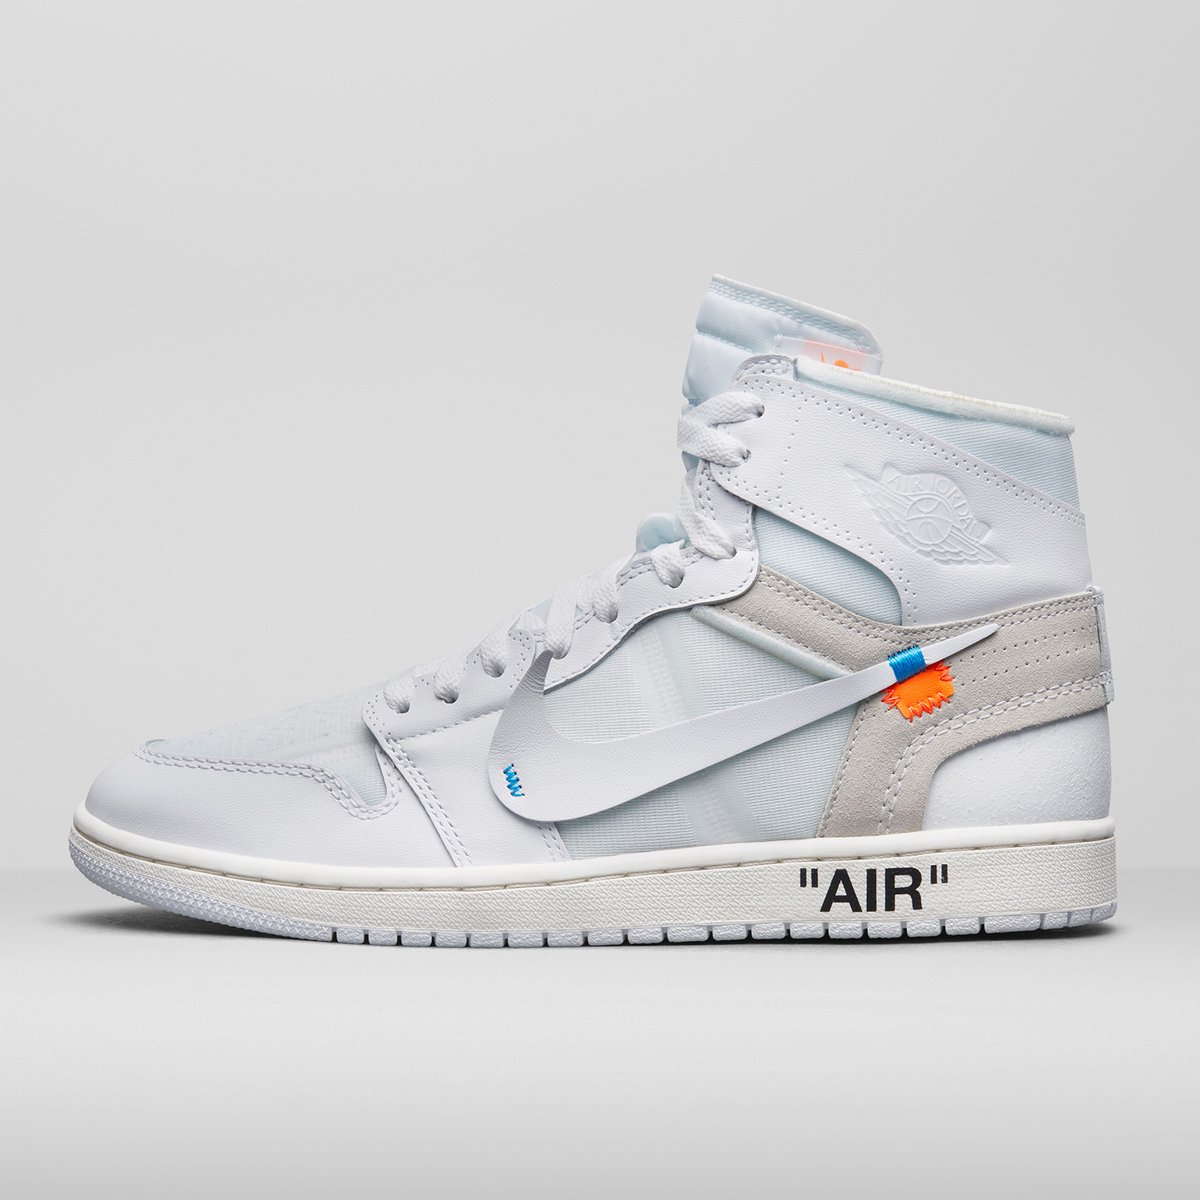 Jordan And Off-White Air Force 1 Dropping In Europe On March 3rd